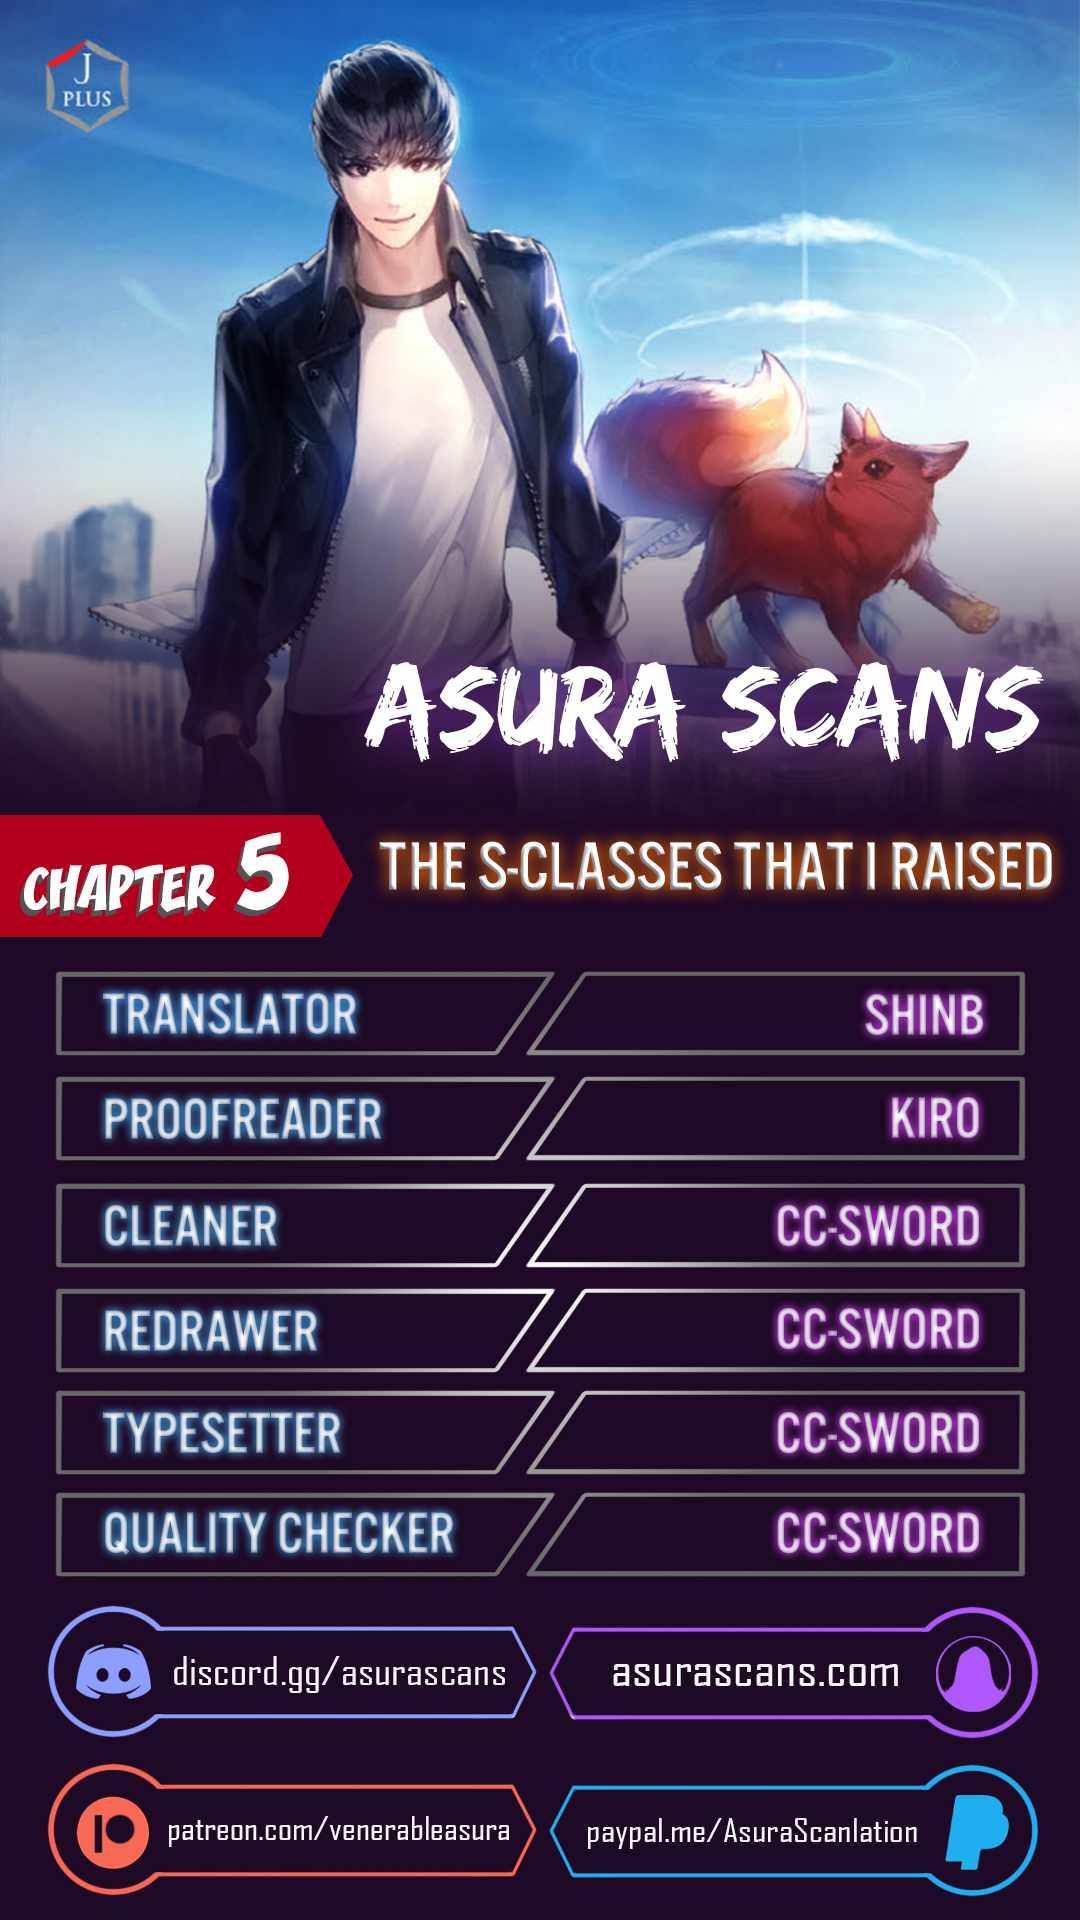 The S-Classes That I Raised chapter 5